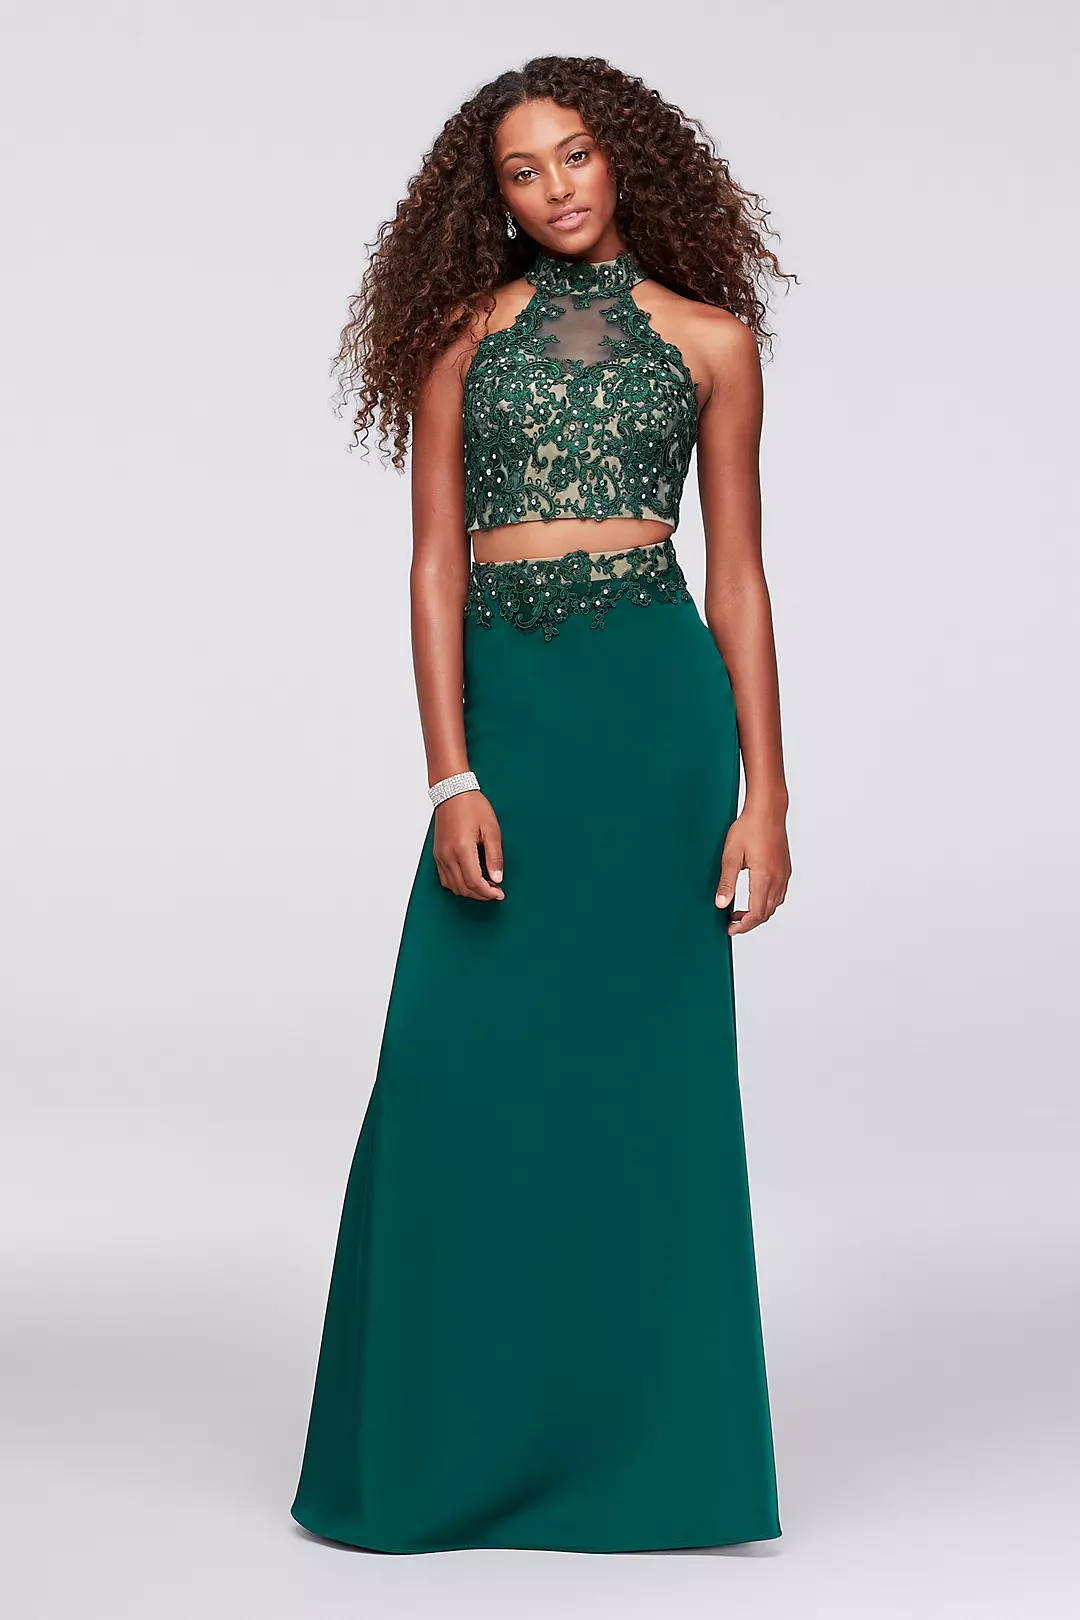 Corded Lace and Jersey Two-Piece Mermaid Dress Image